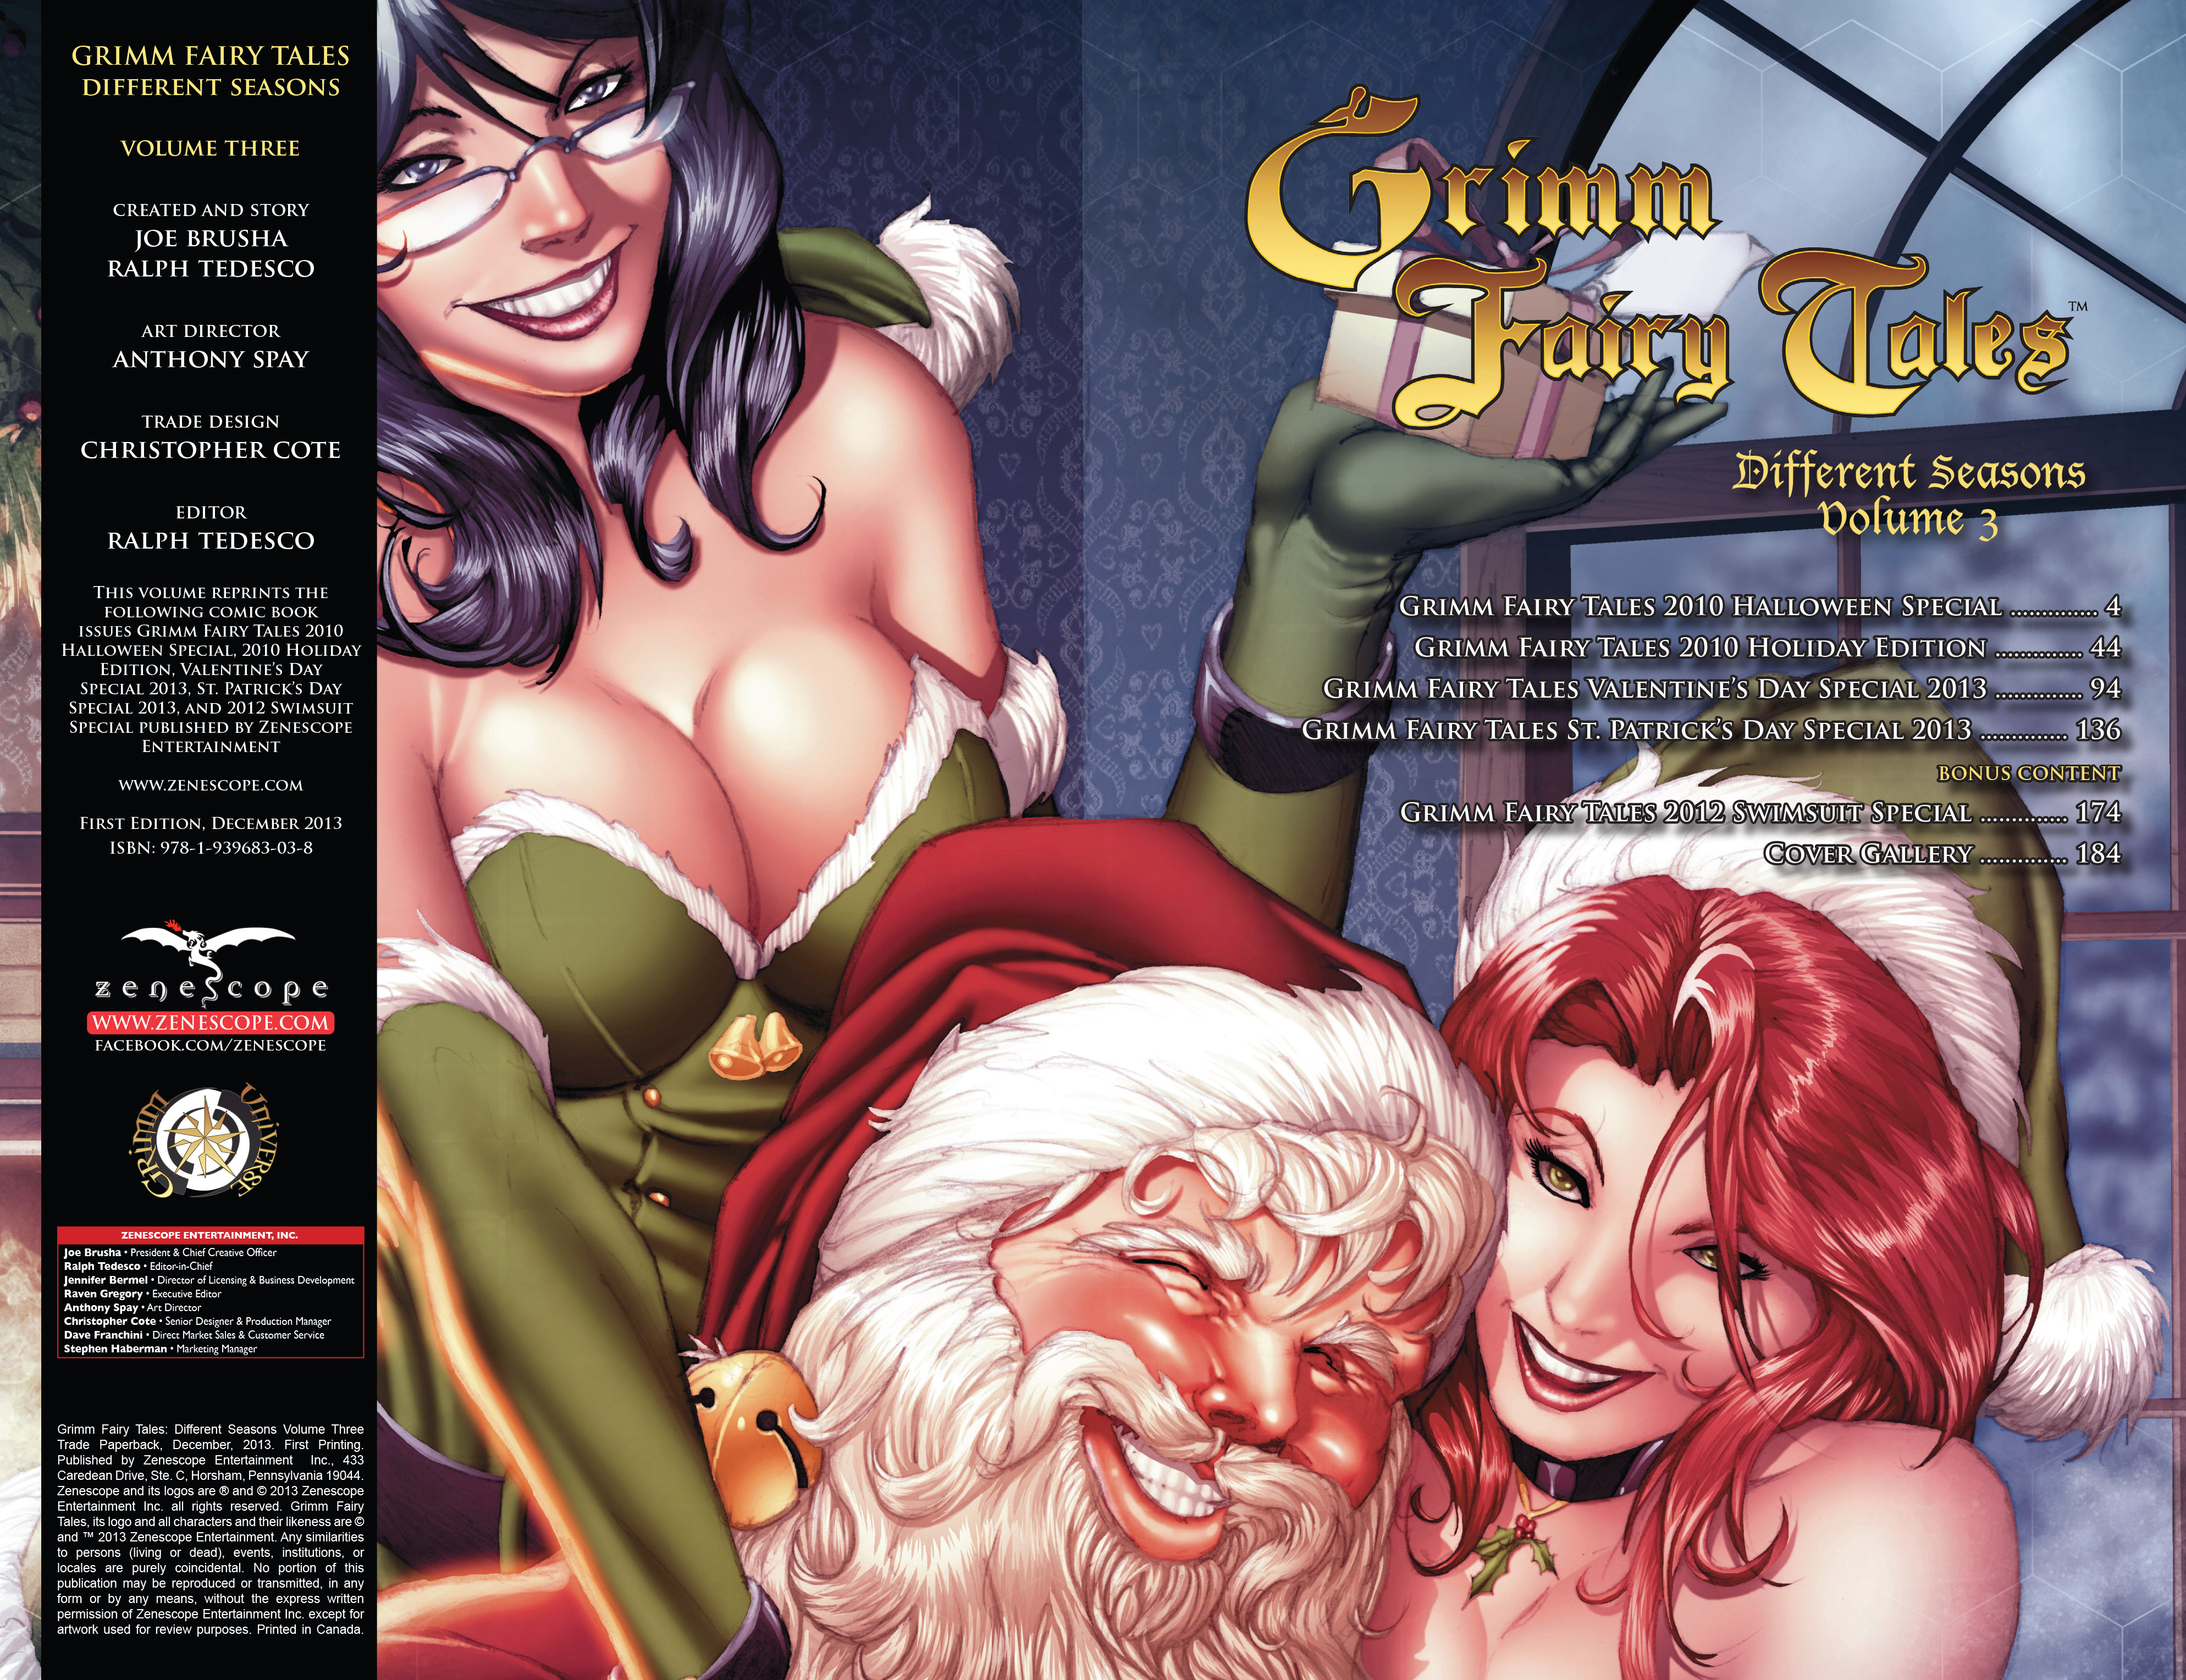 Read online Grimm Fairy Tales: Different Seasons comic -  Issue # TPB 3 - 3